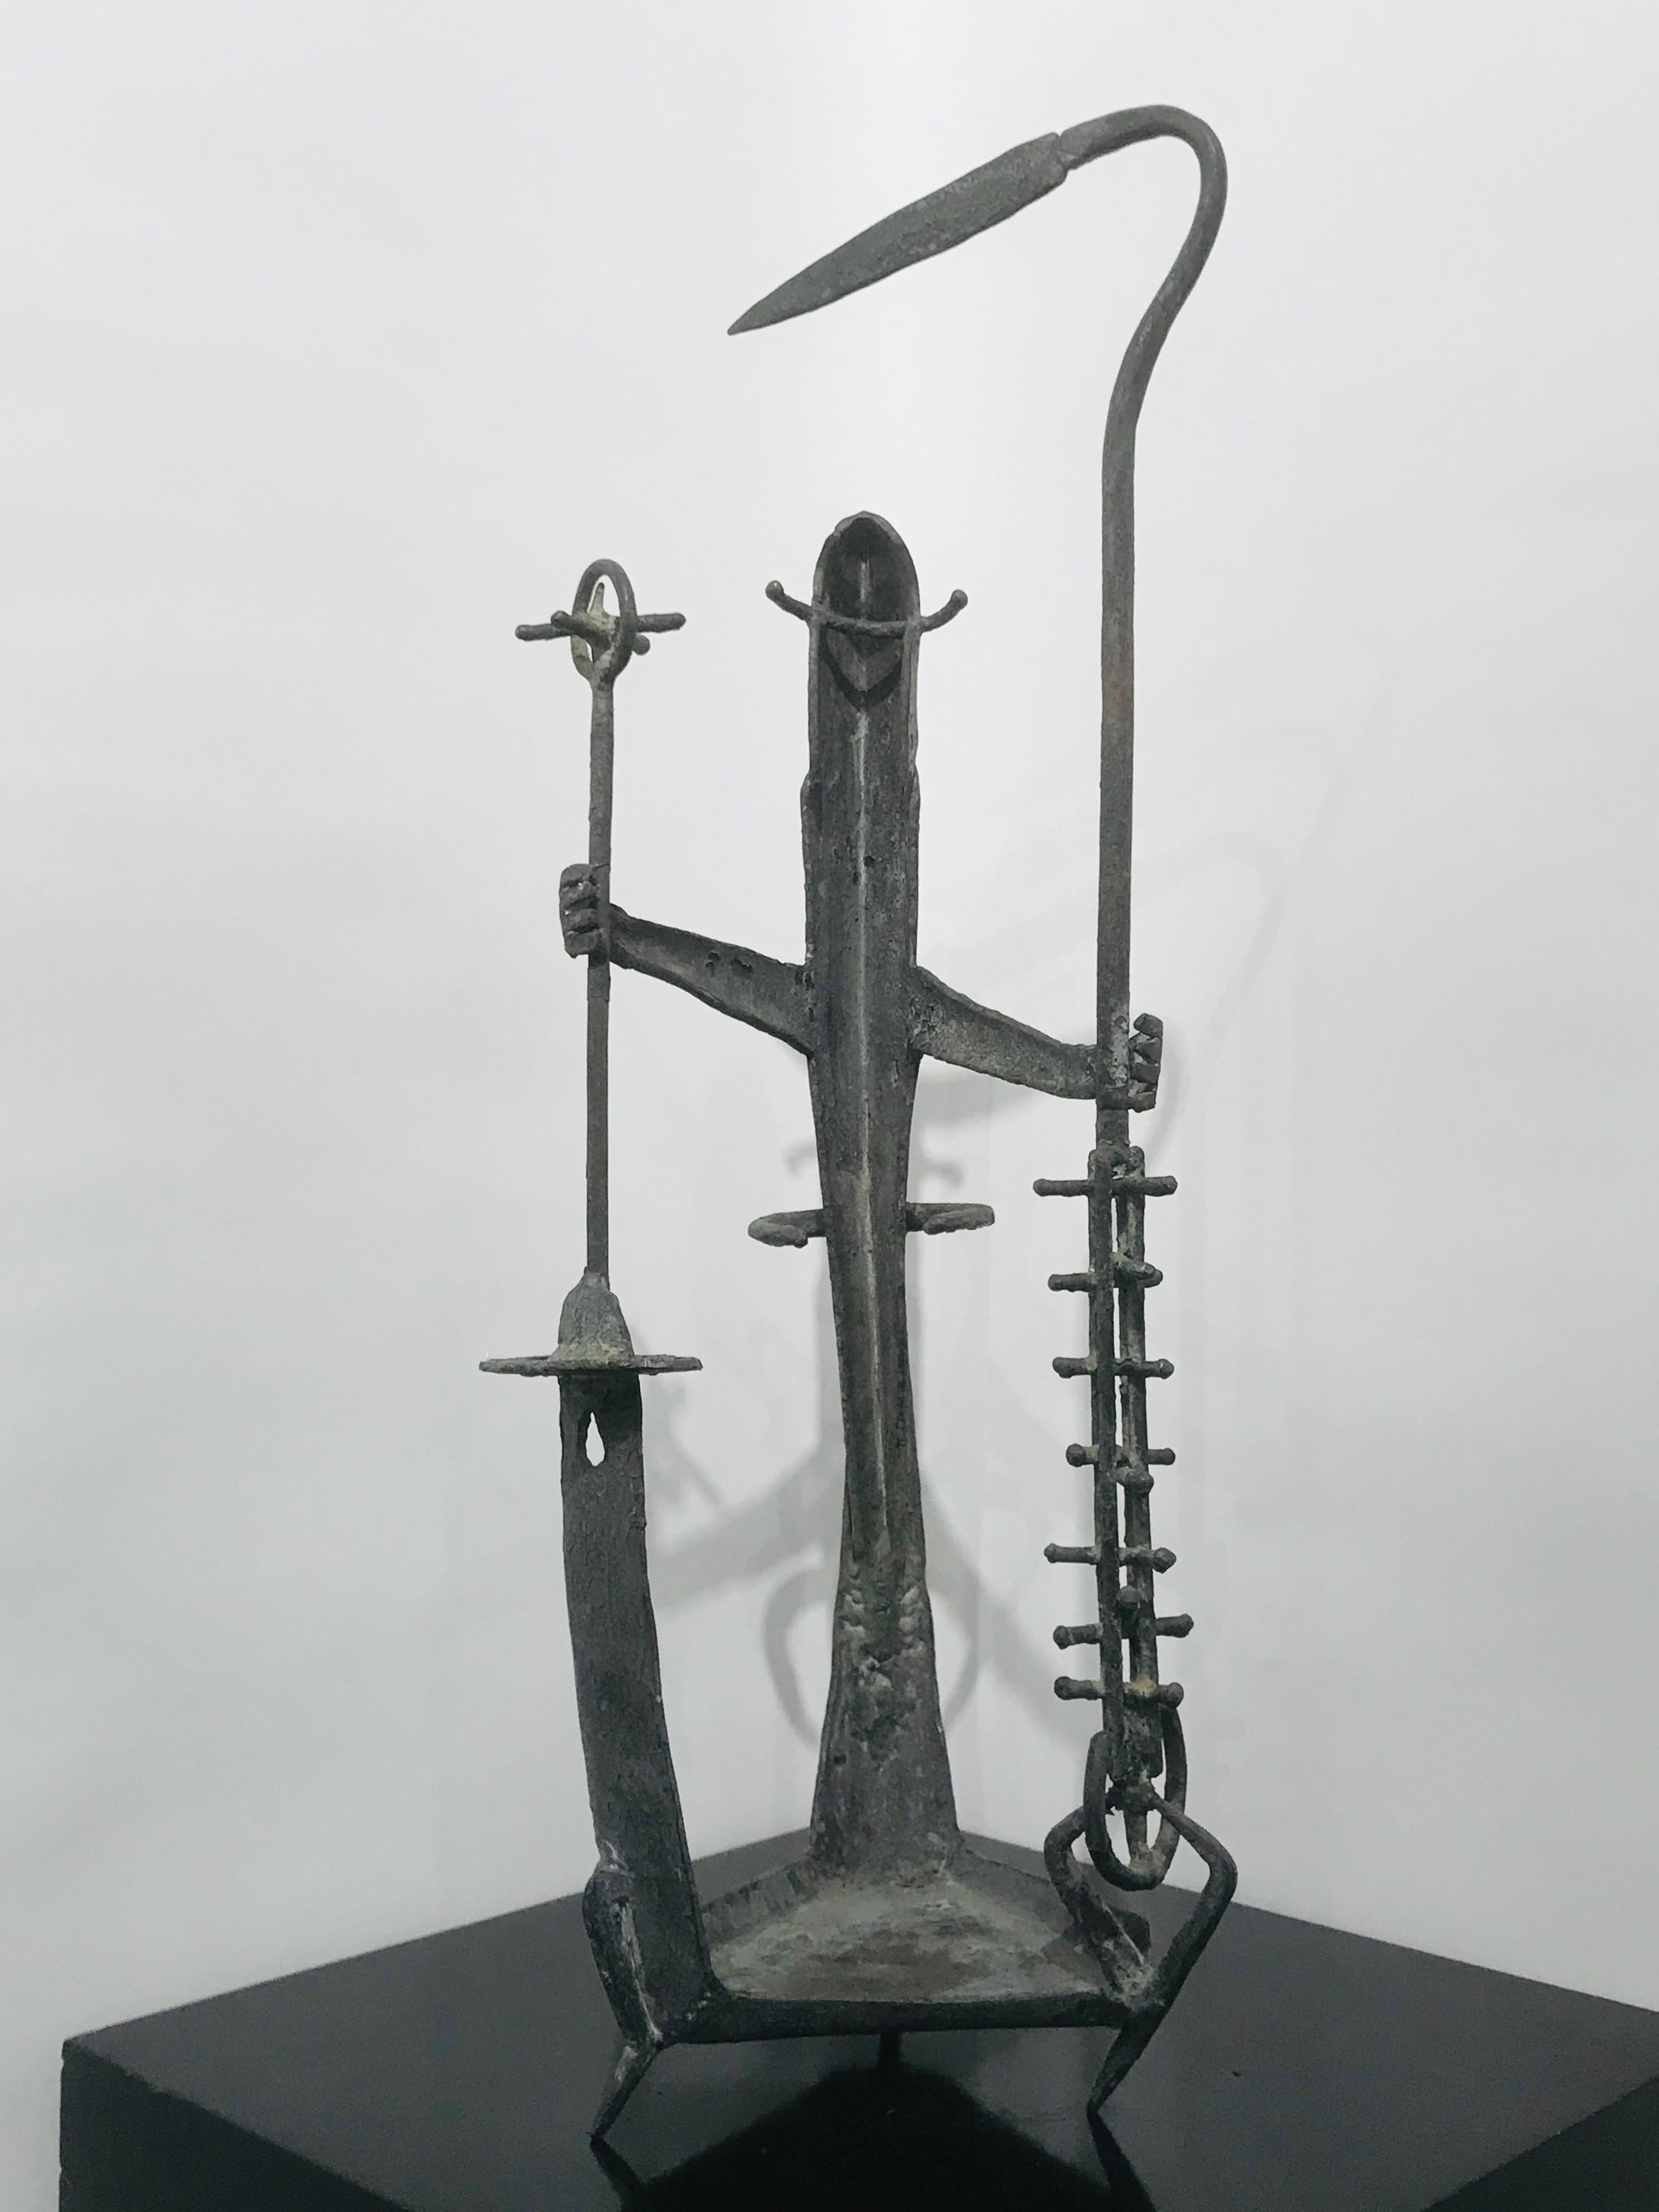 1907 - 2000
Tolerton was a bay area artist known for iron sculptures 
His art was shown at LACMA, De Young Museum, Oakland Museum, Denver Museum and many other art venues.
This piece is a fine example of his aesthetics.
Though intended as a